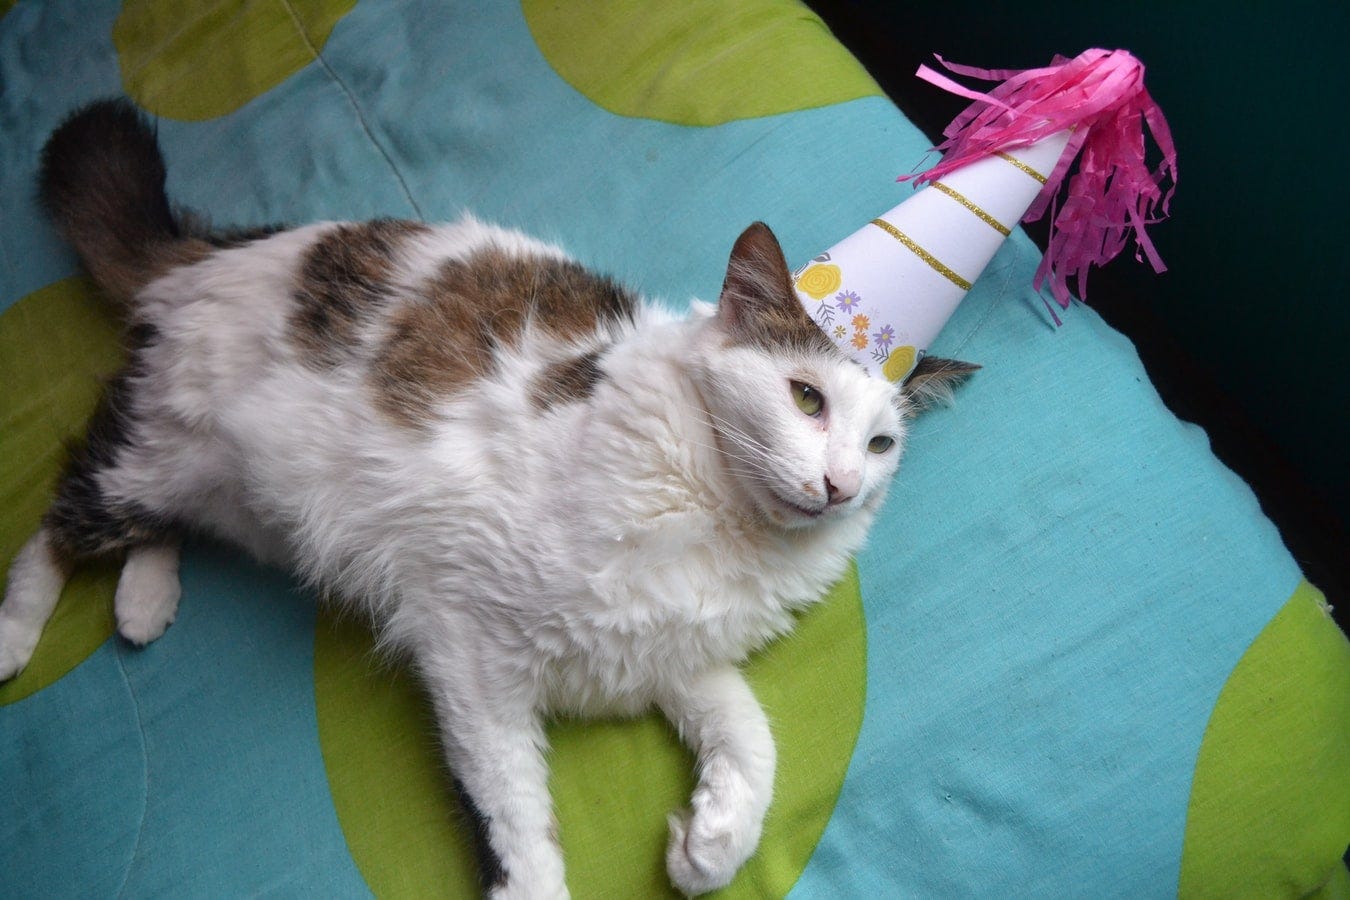 a cat on a bed wearing a party hat